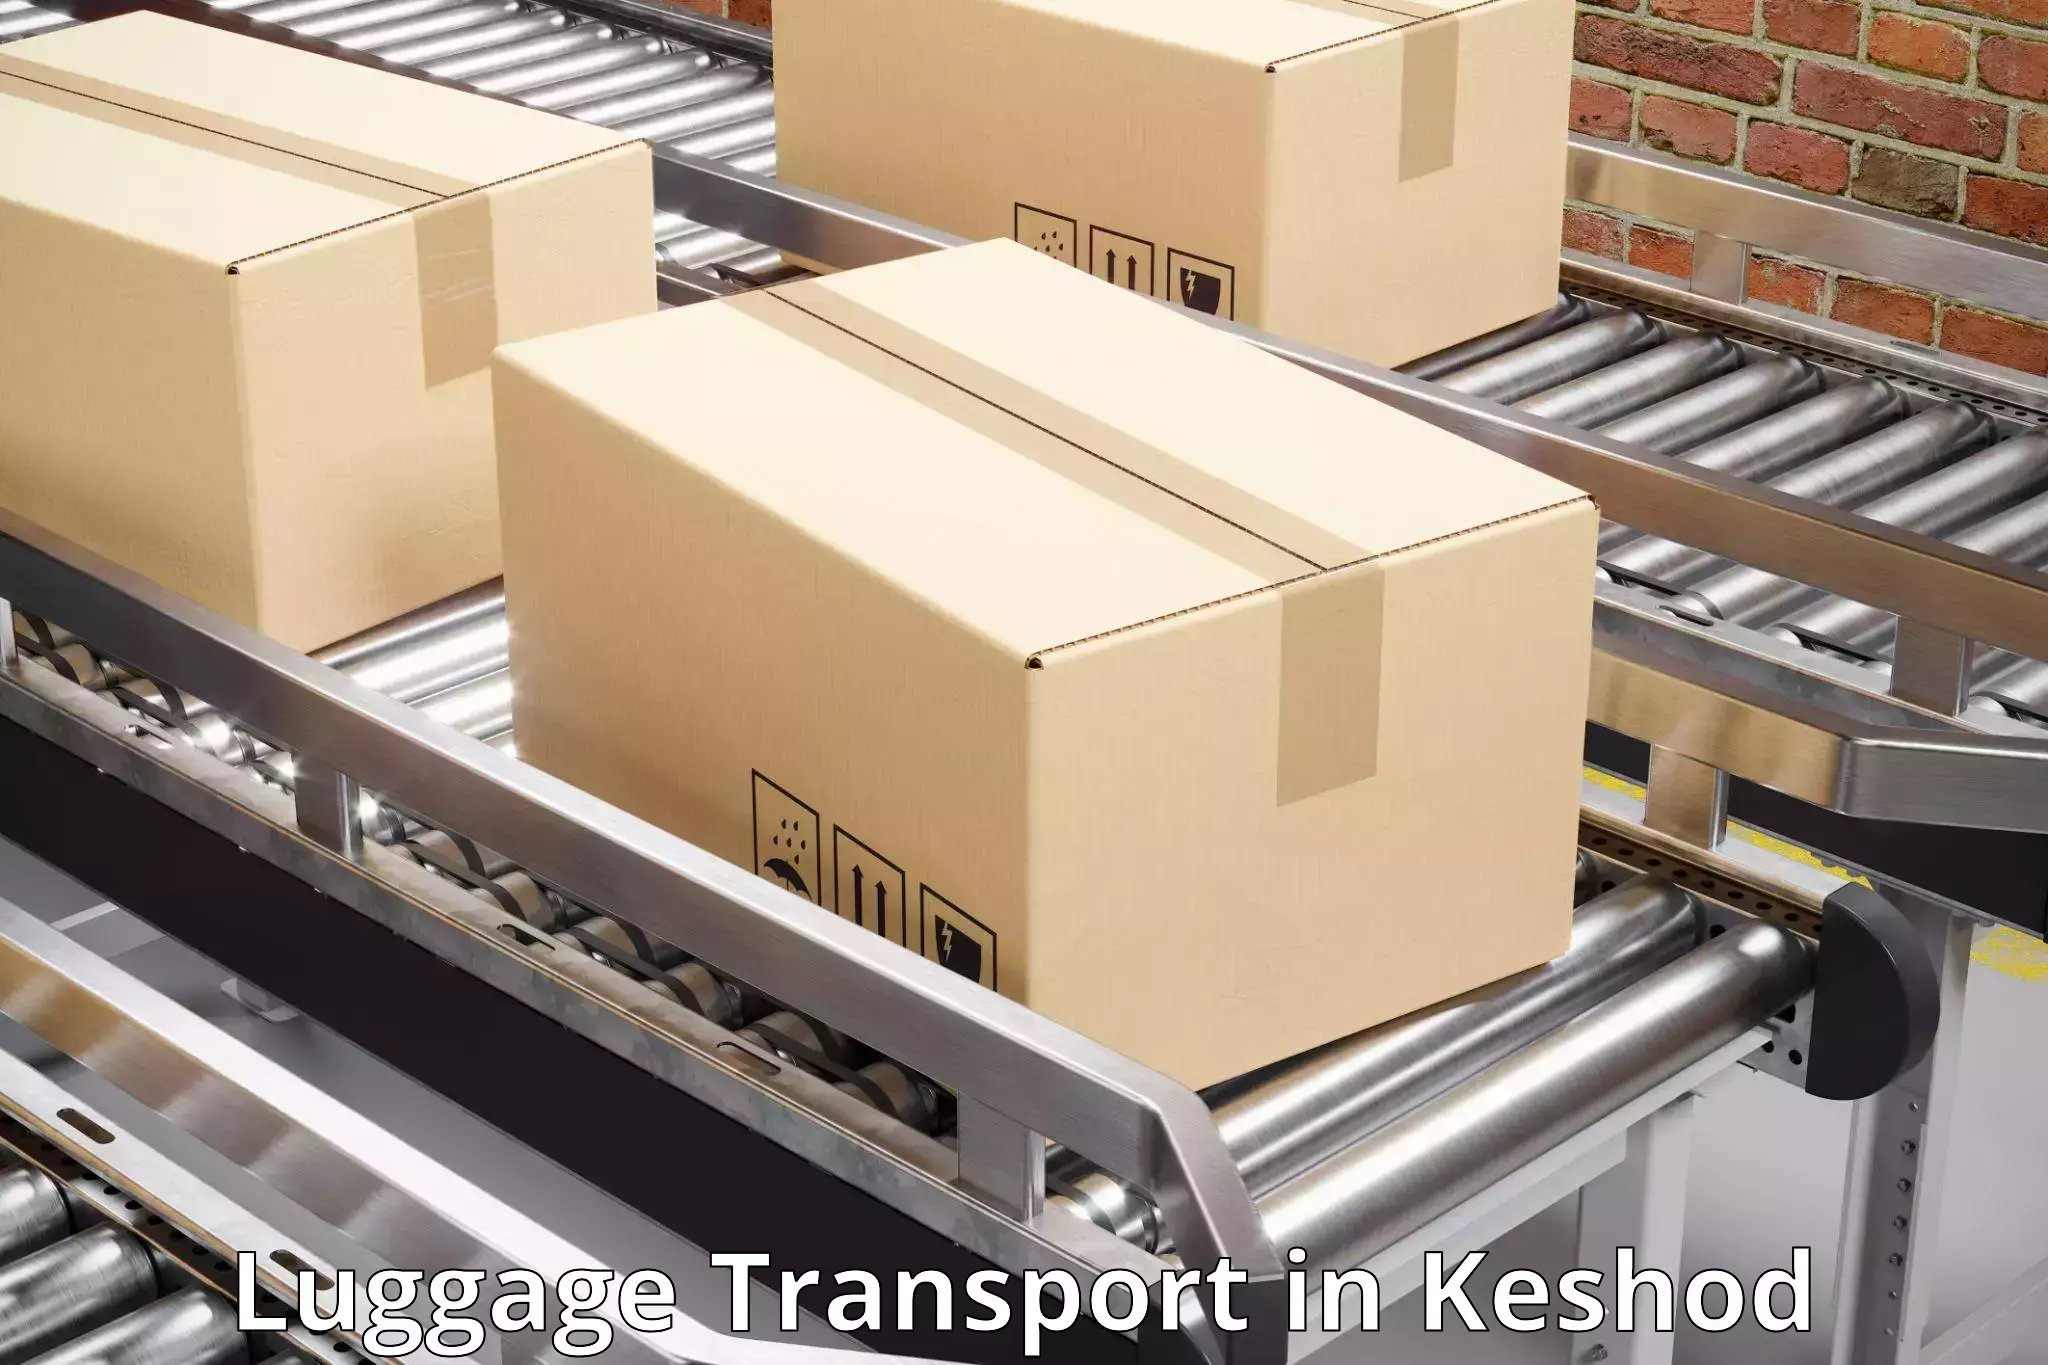 Luggage transport operations in Keshod